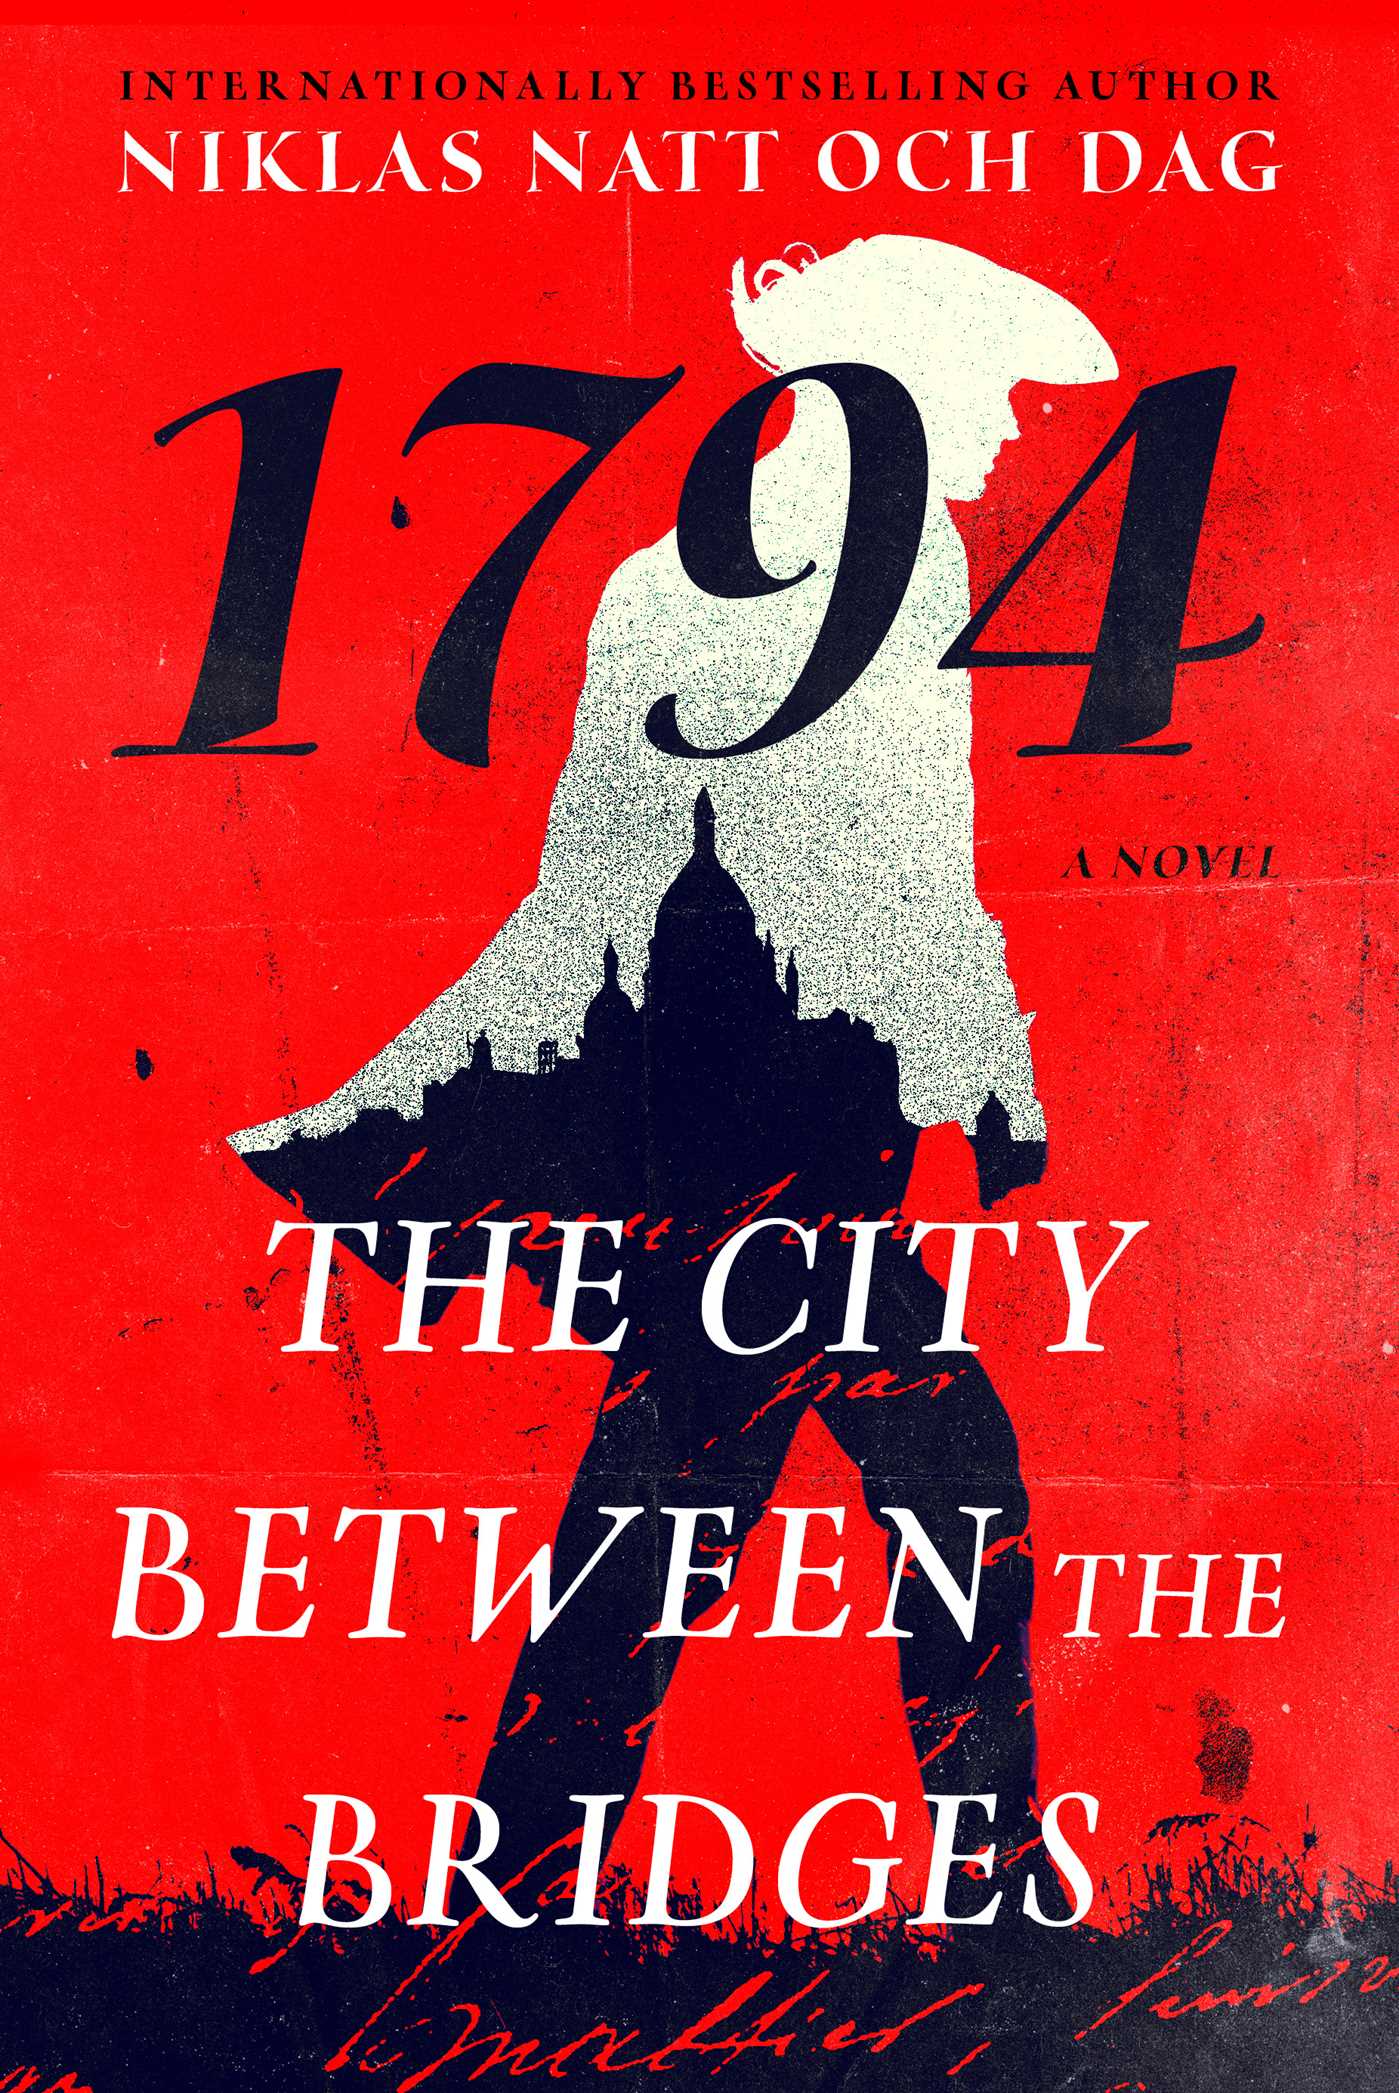 cover image for 1794 The city between the bridges